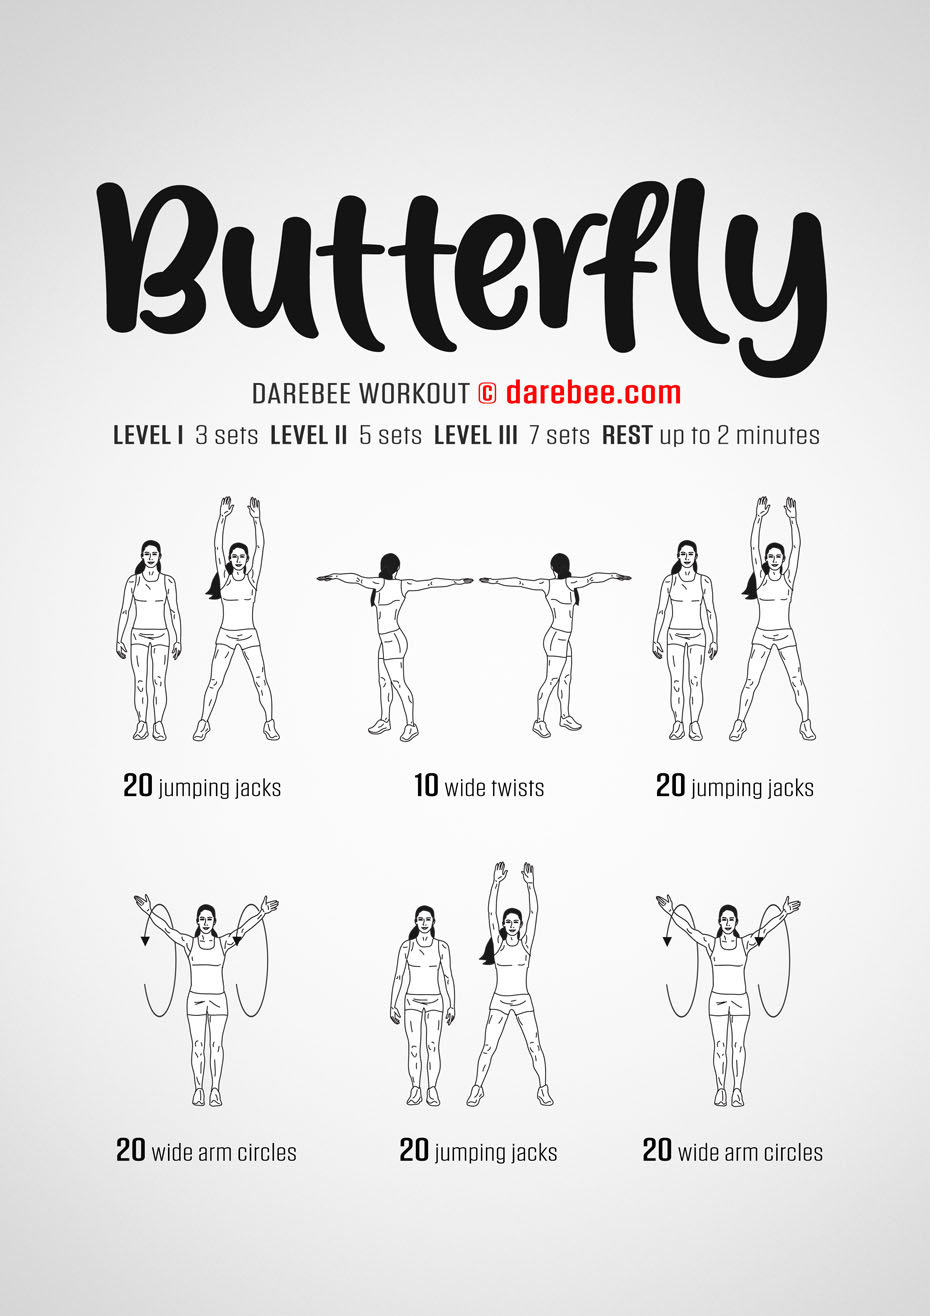 Butterfly is a Darebee home-fitness aerobic and cardiovascular workout that helps you become fitter and more capable of moving your body.